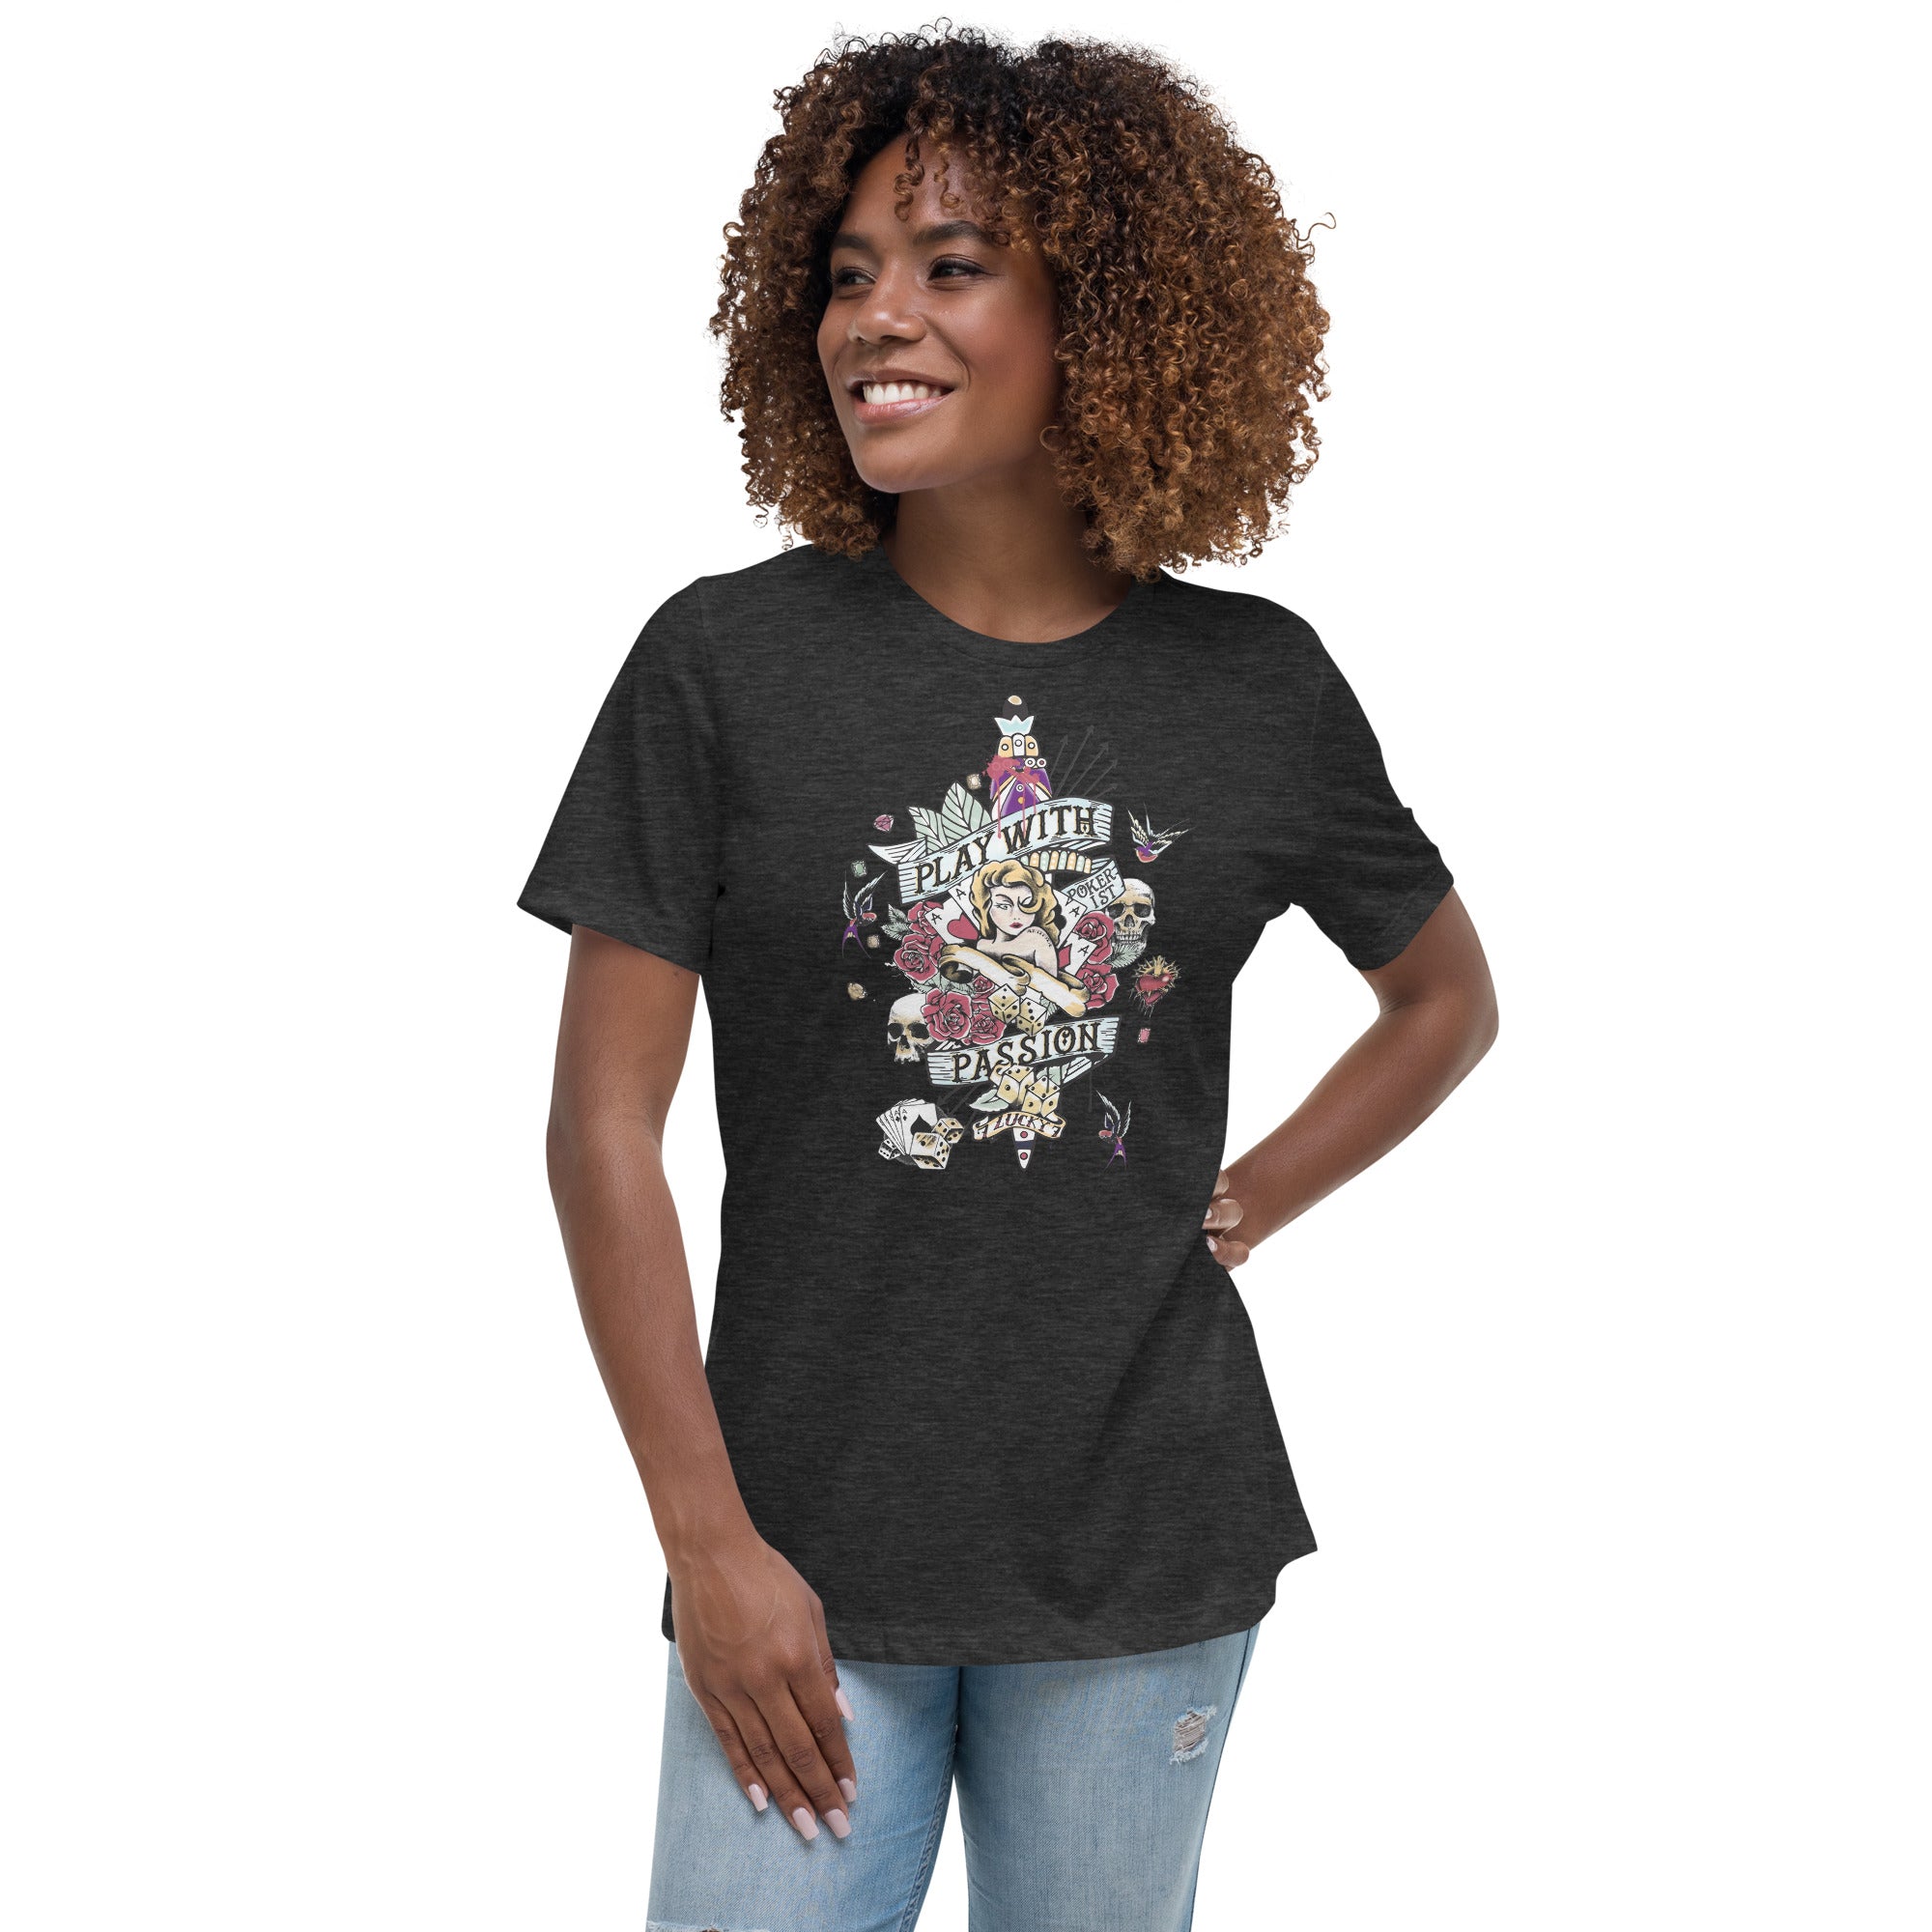 Play with Passion - Women's Relaxed T-Shirt